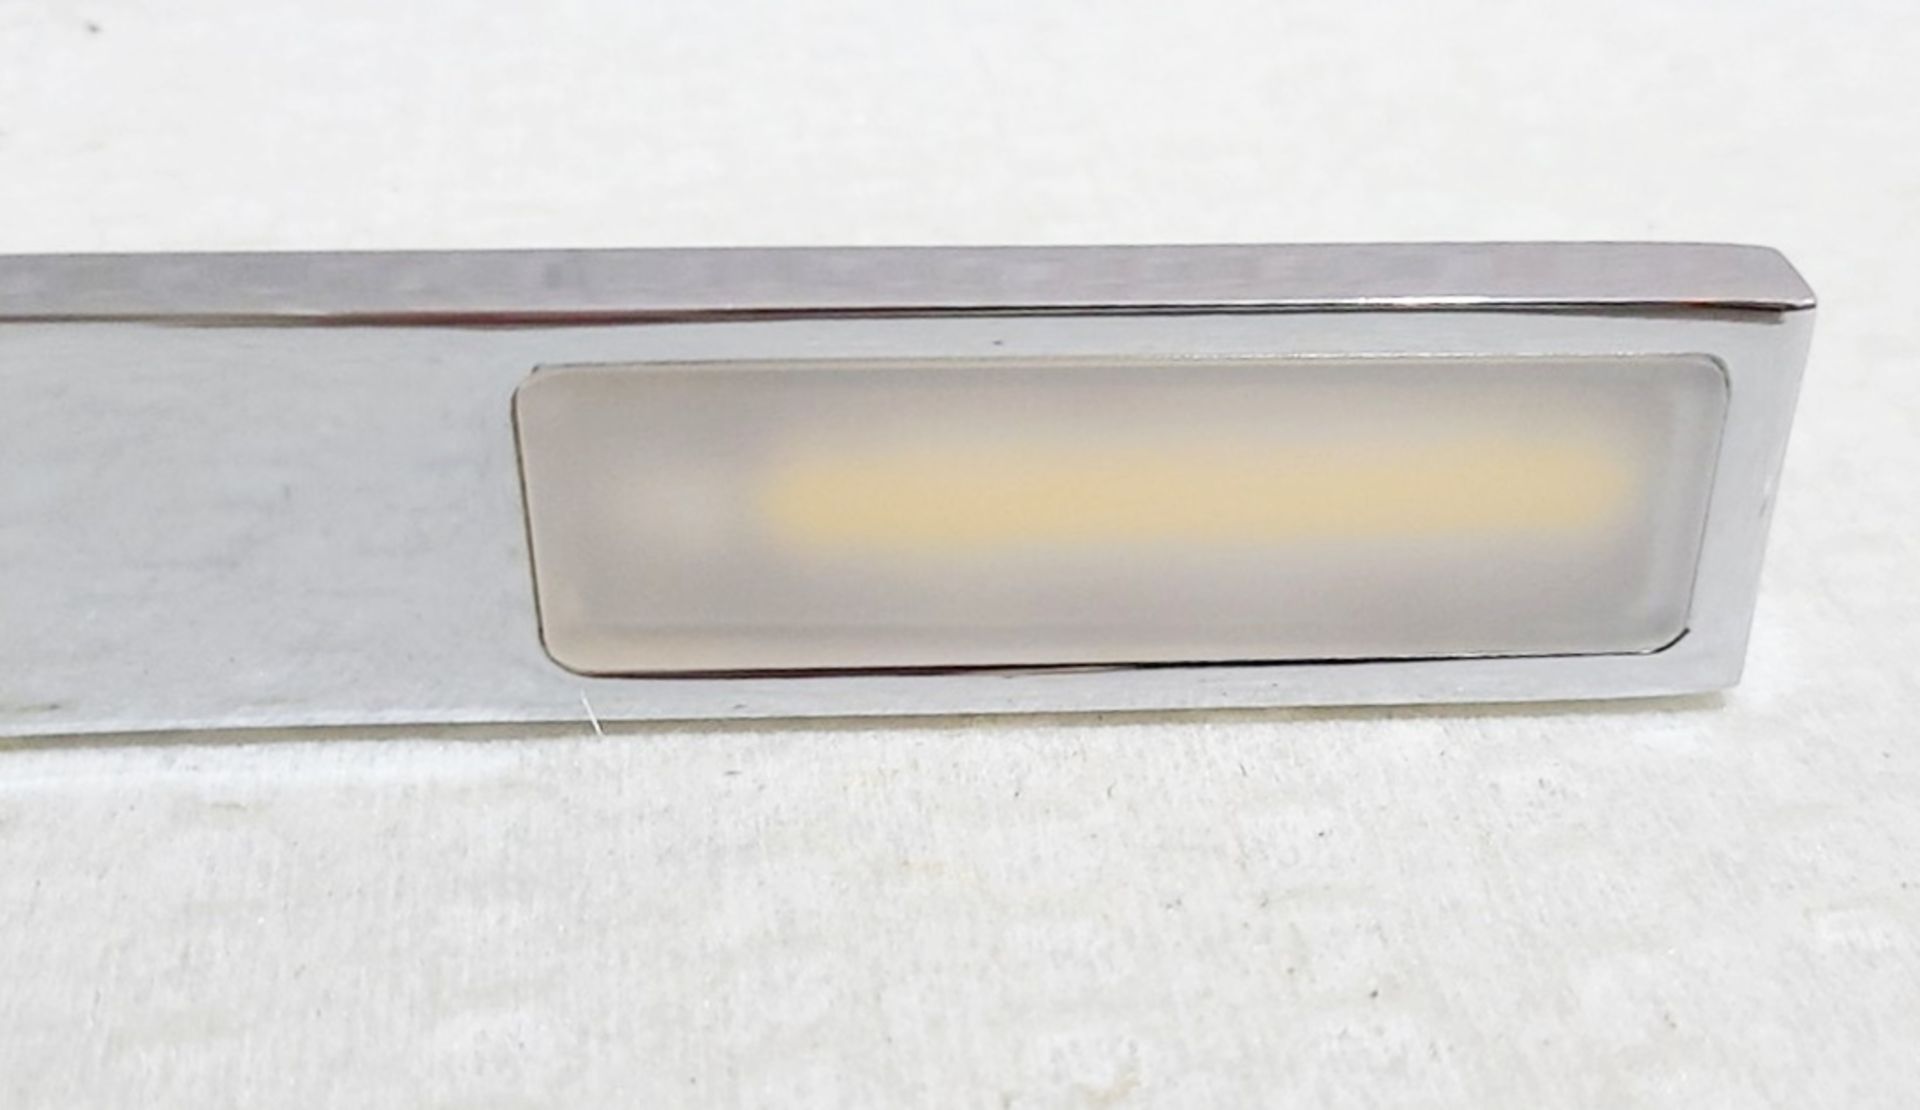 1 x SENSIO Hydra Sleek COB LED Technology Over Cabinet/Mirror Light With Acrylic Cover 165mm - Image 6 of 8